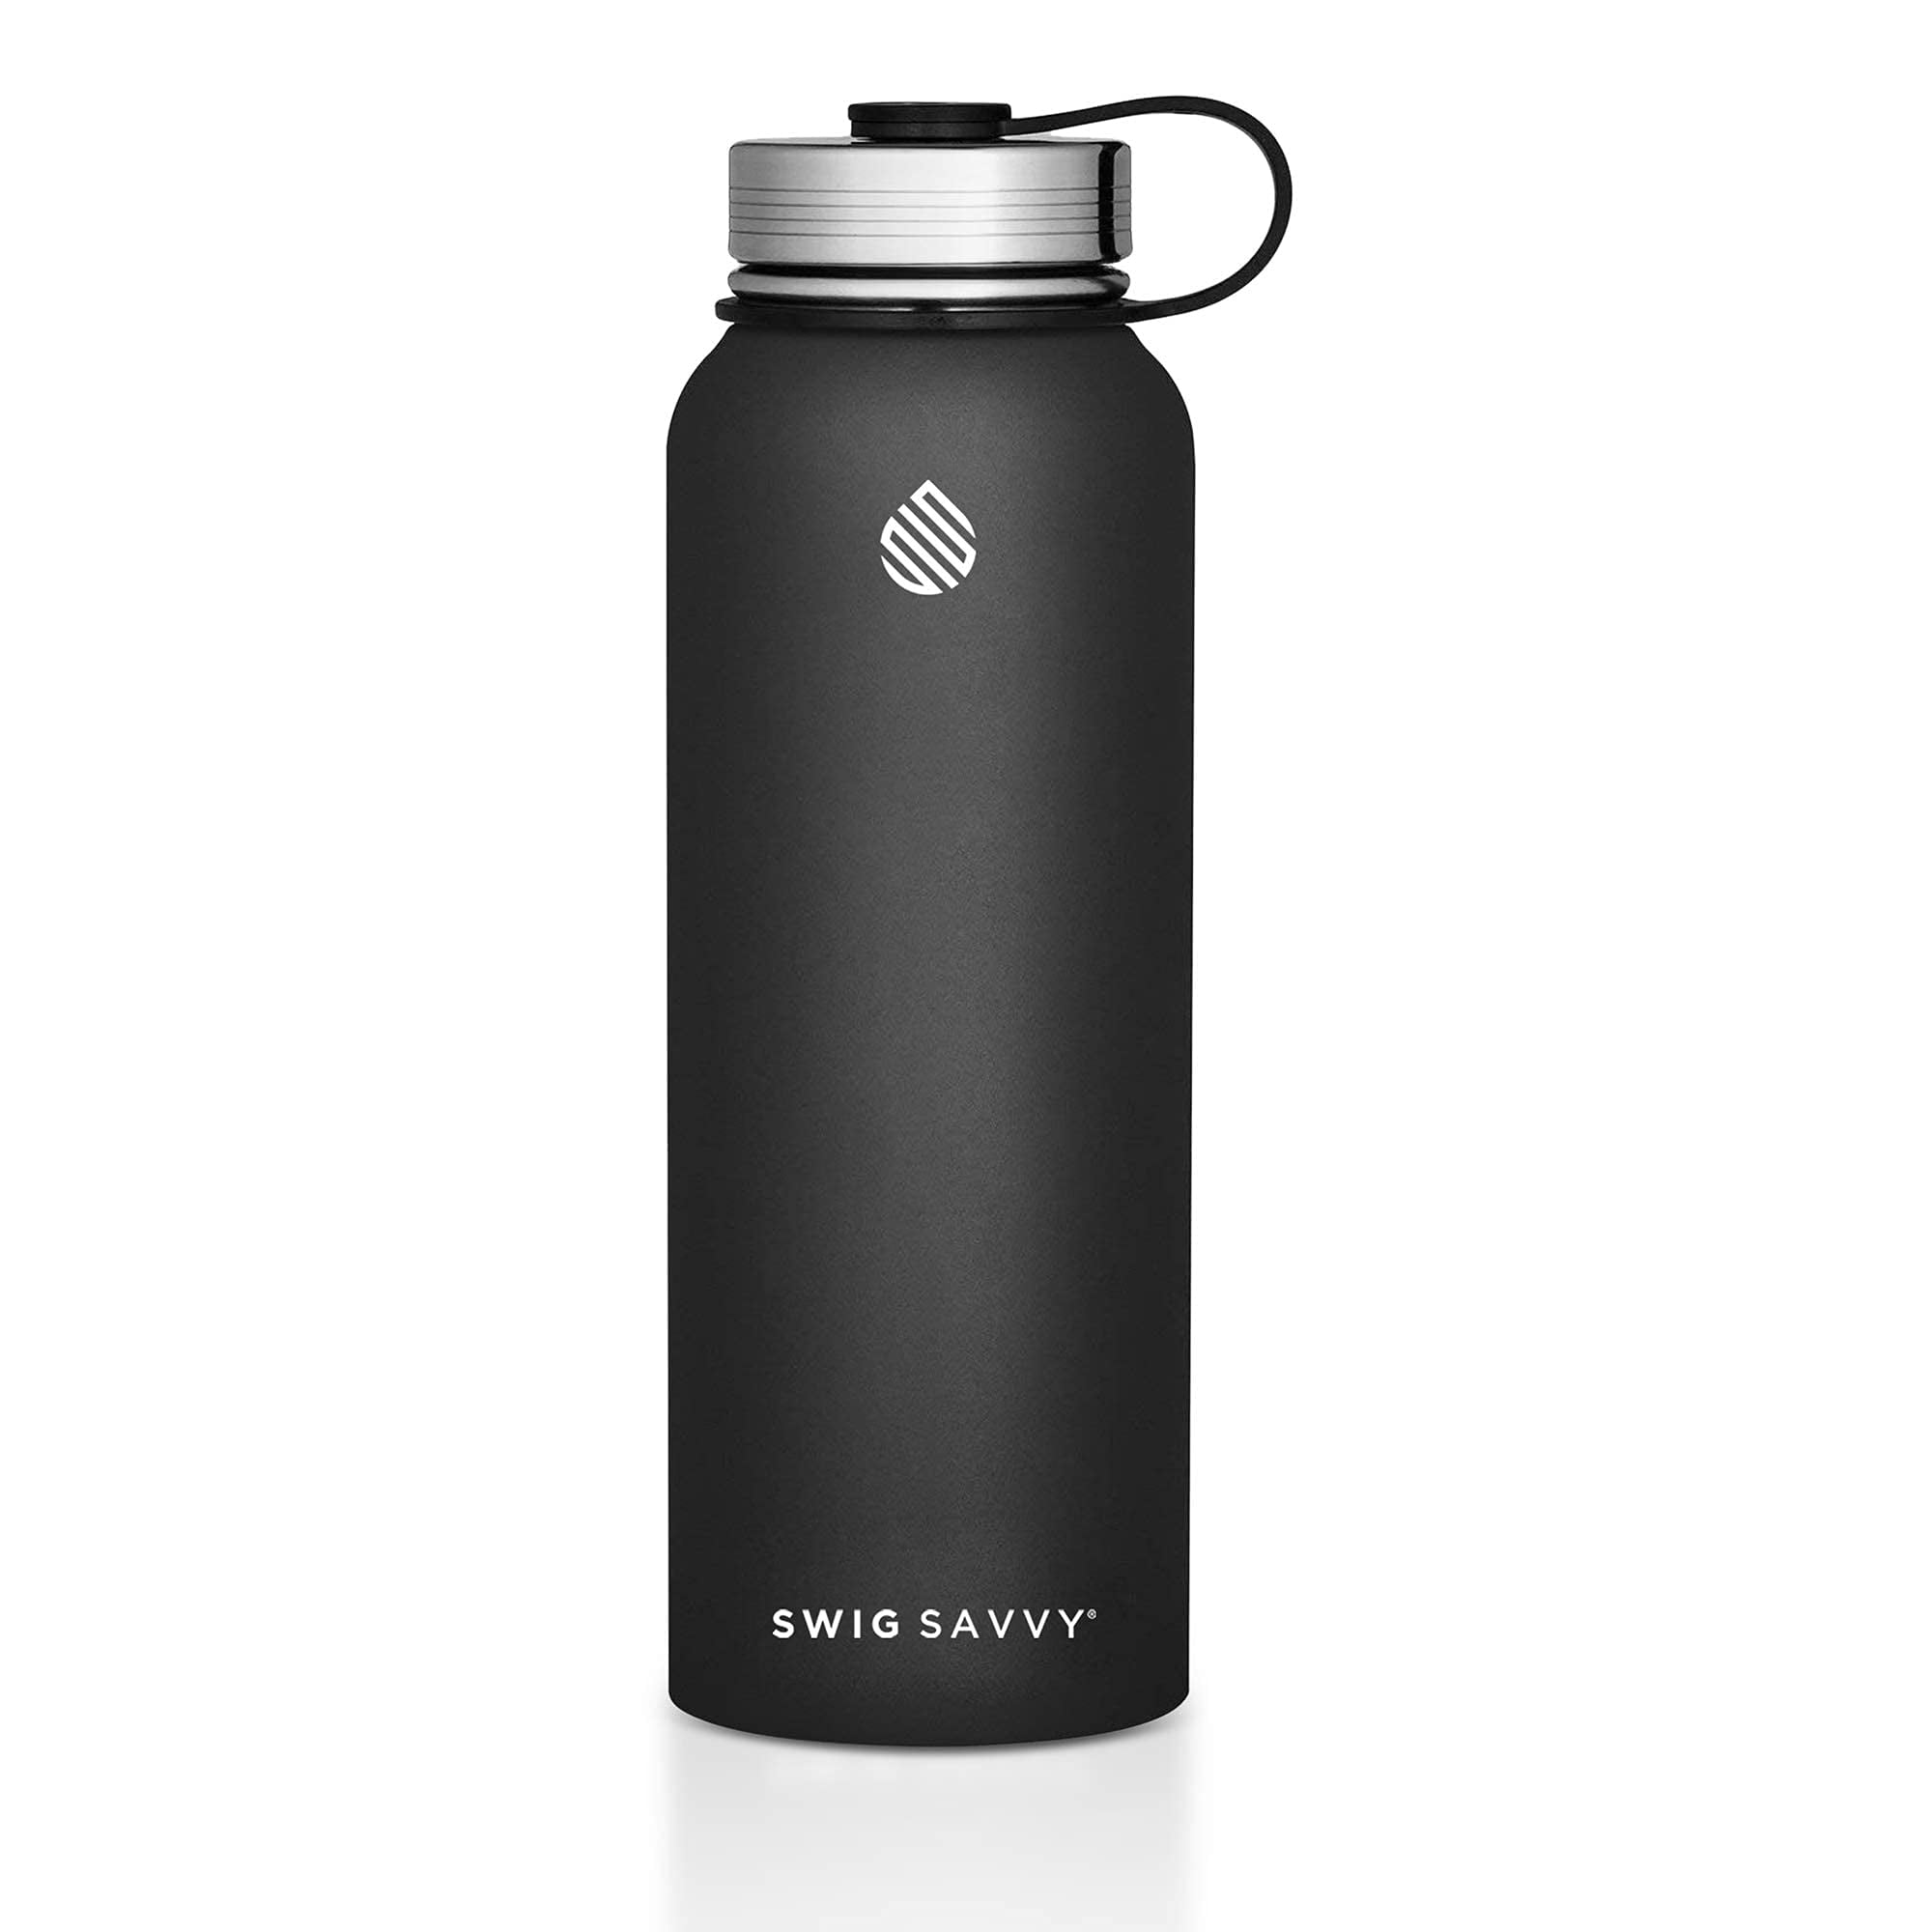 Swig Savvy 40oz Vacuum Insulated Stainless Steel Water Bottle